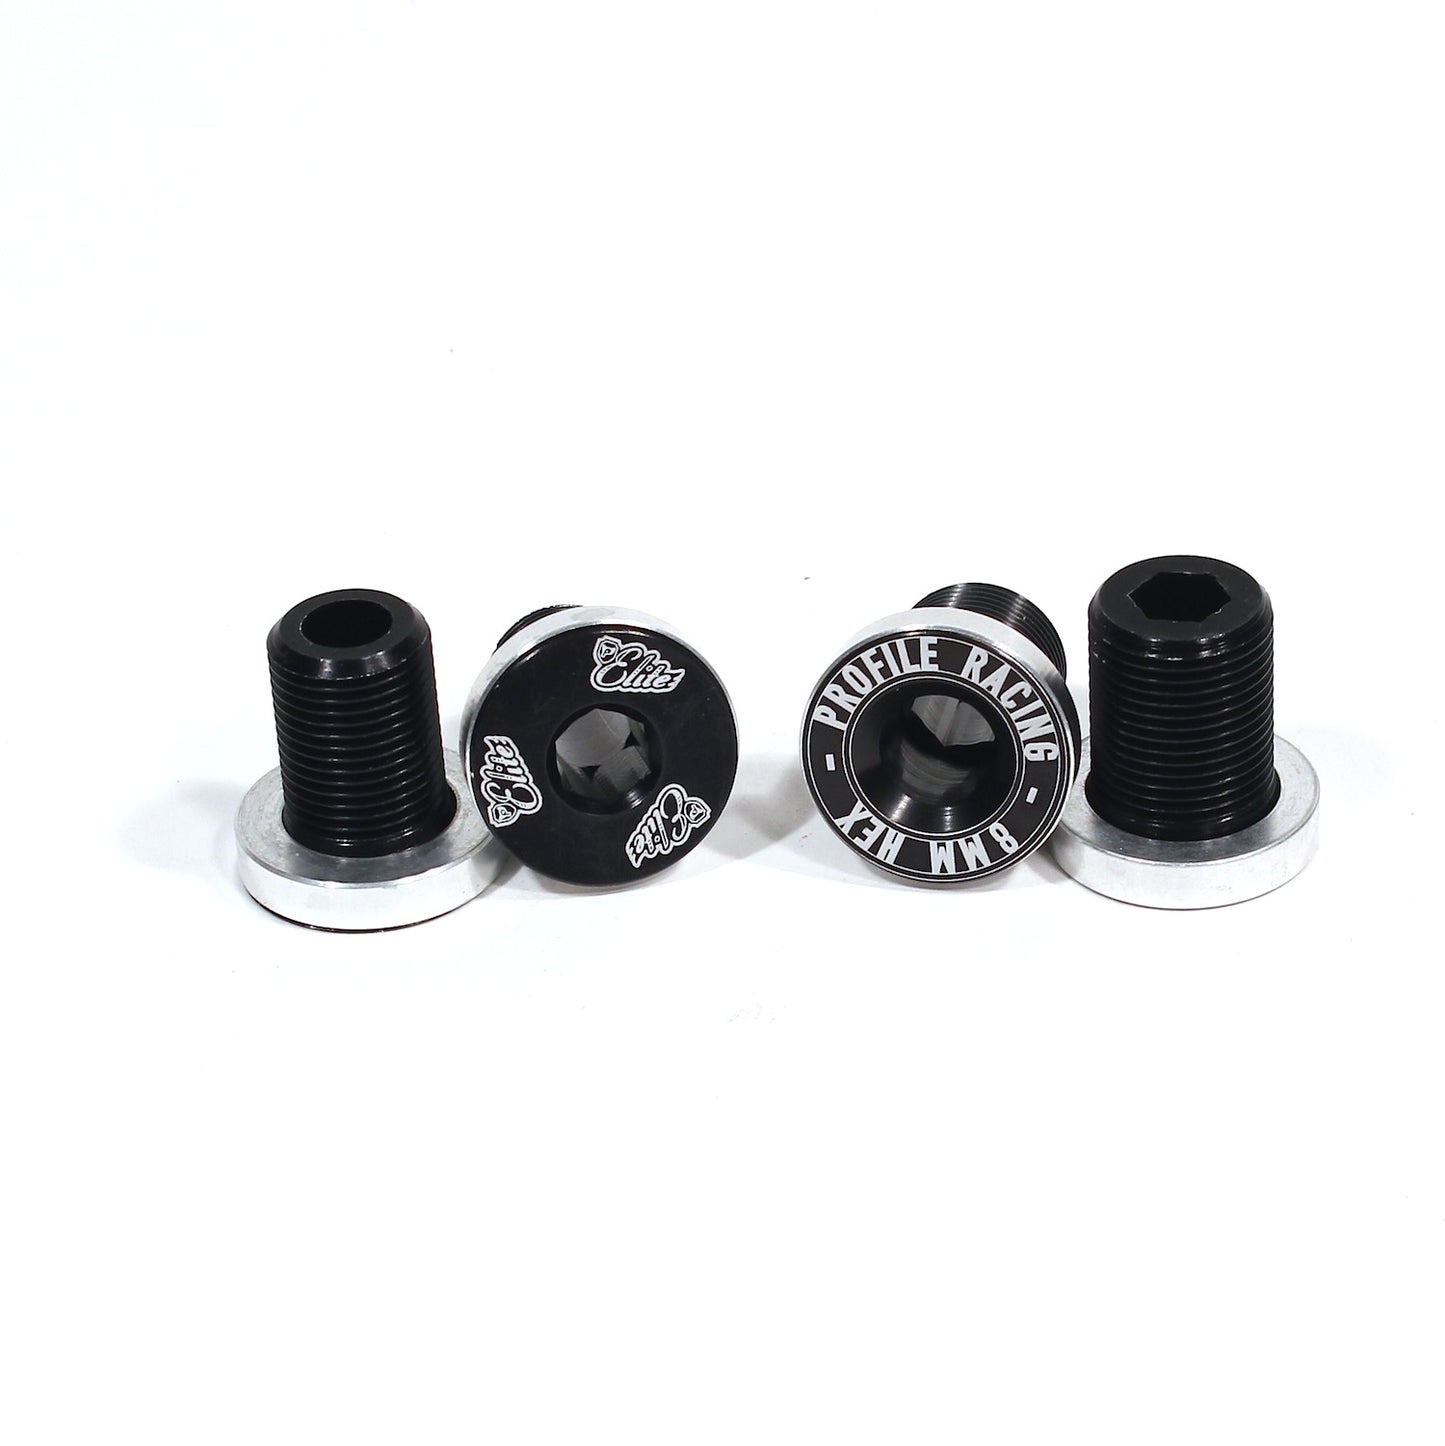 Profile Crank spindle Bolts